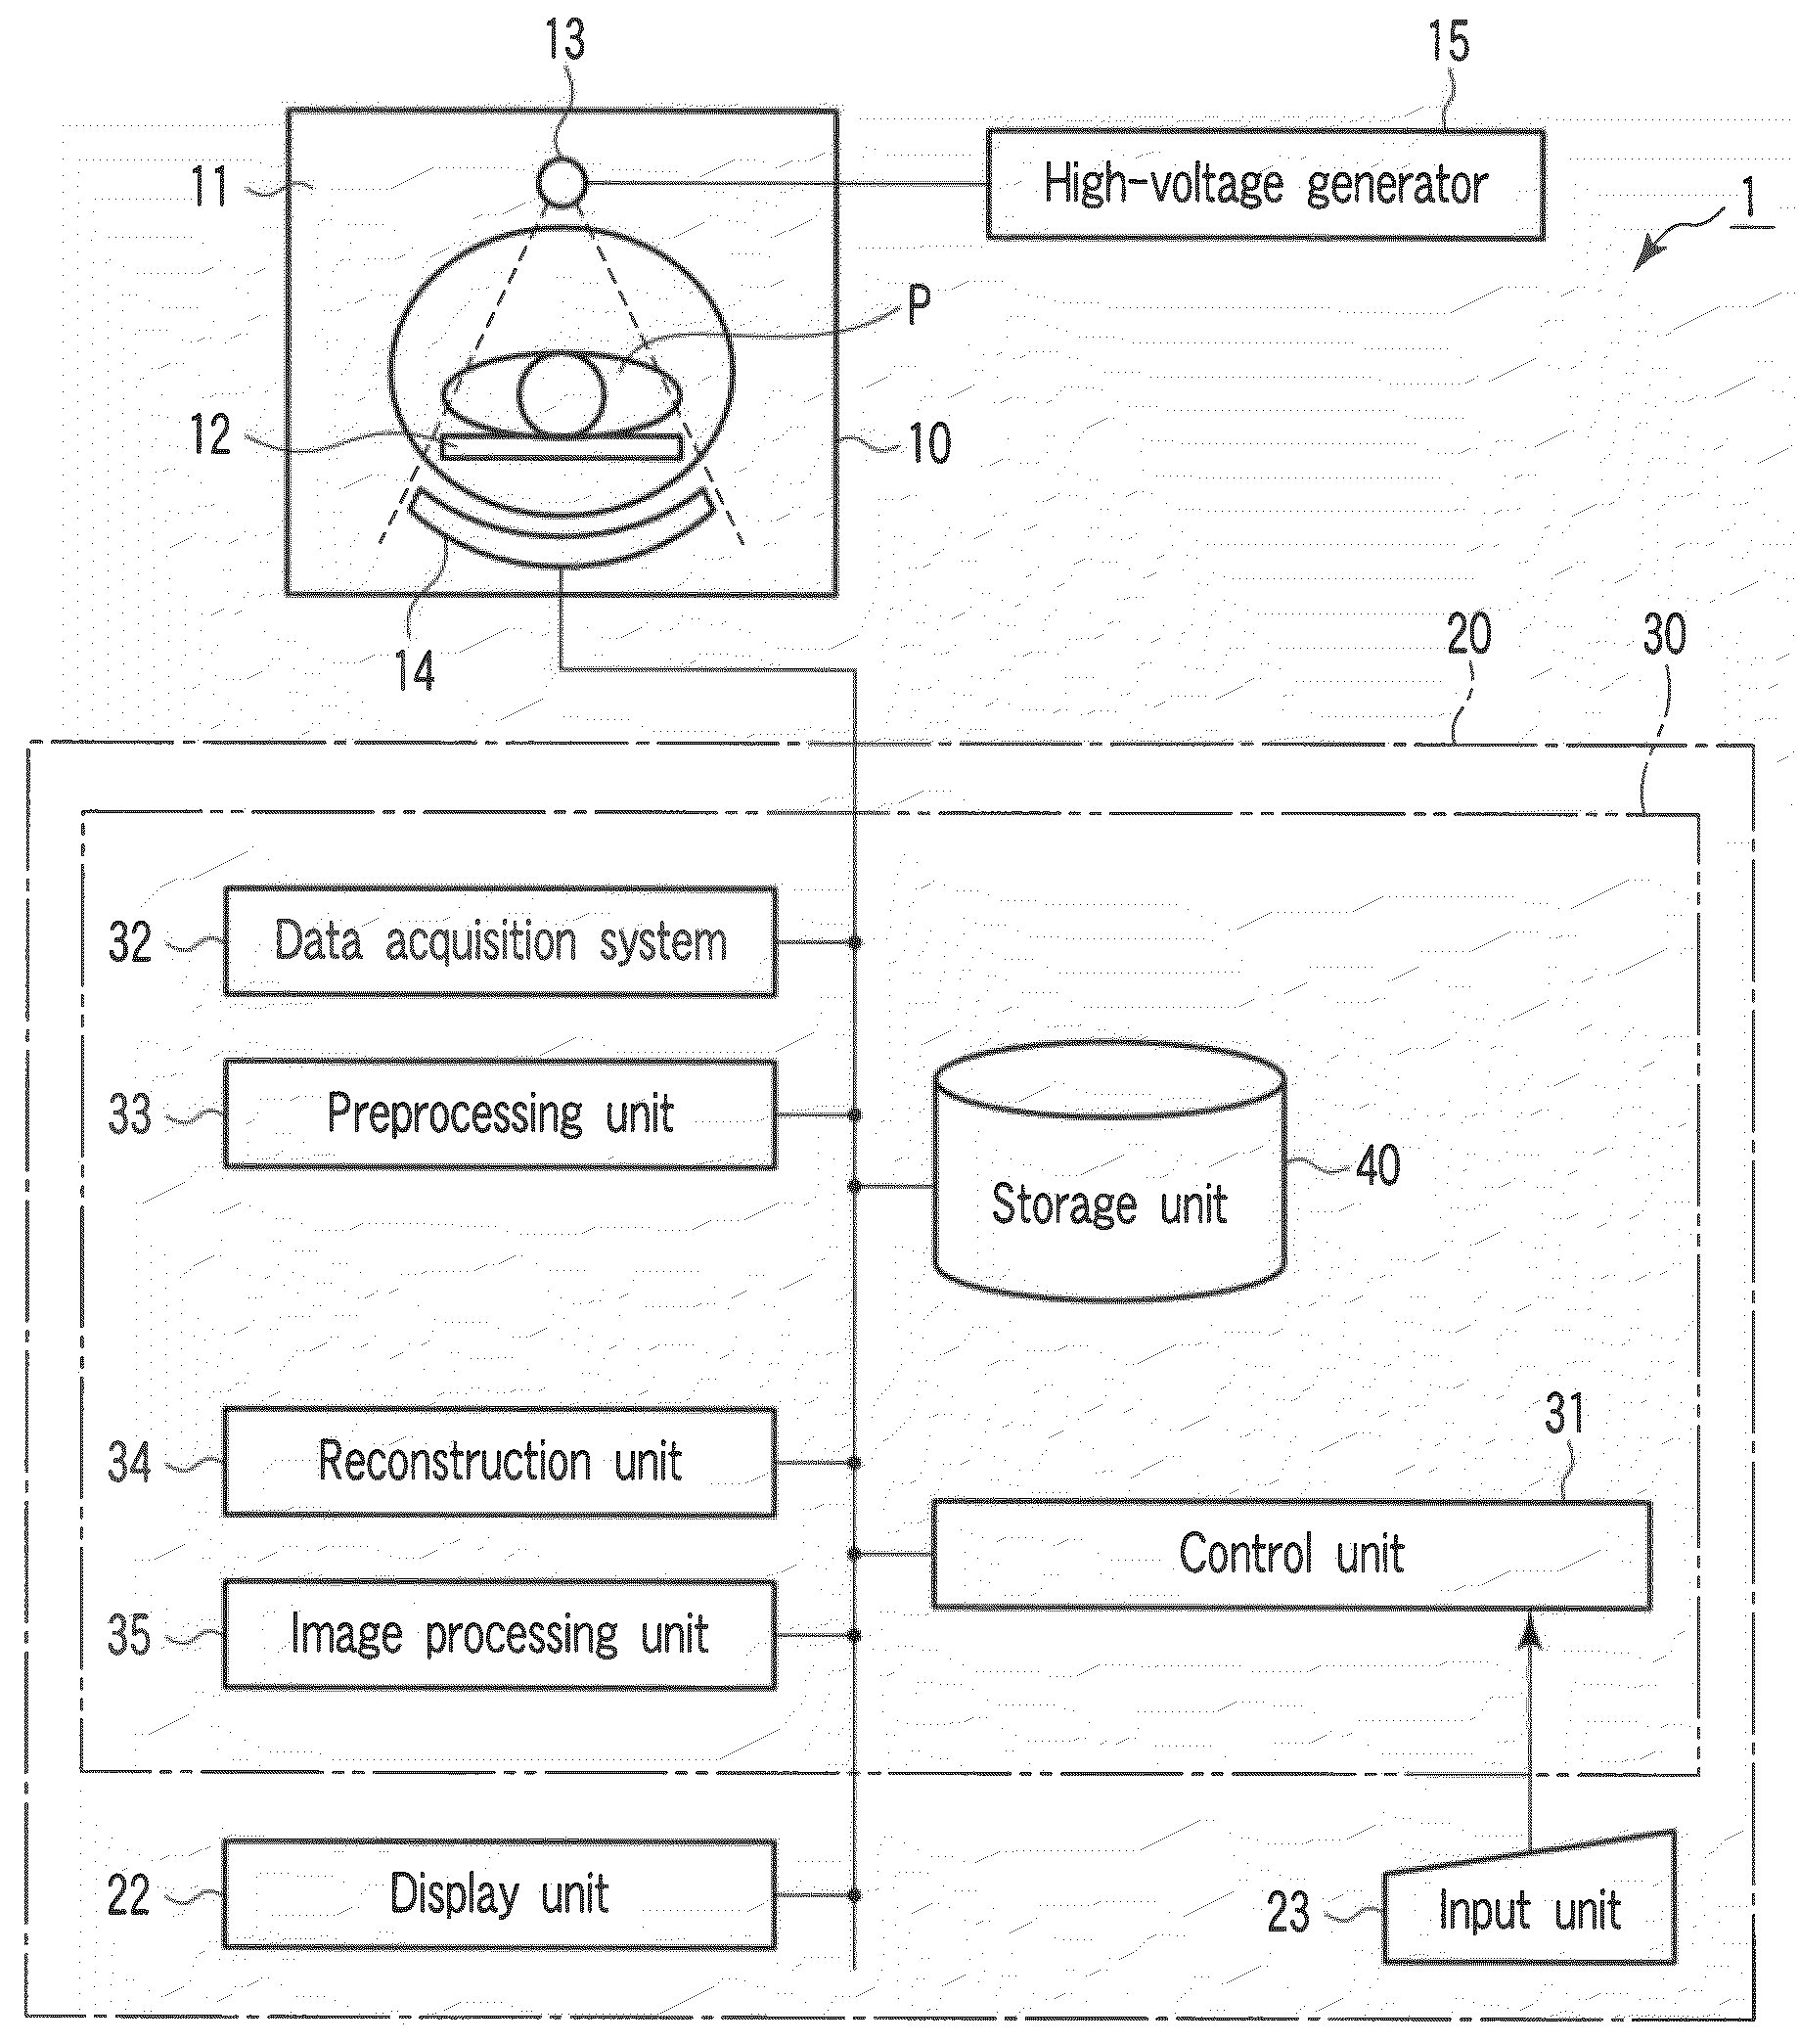 X-ray computed tomography apparatus and image processing apparatus